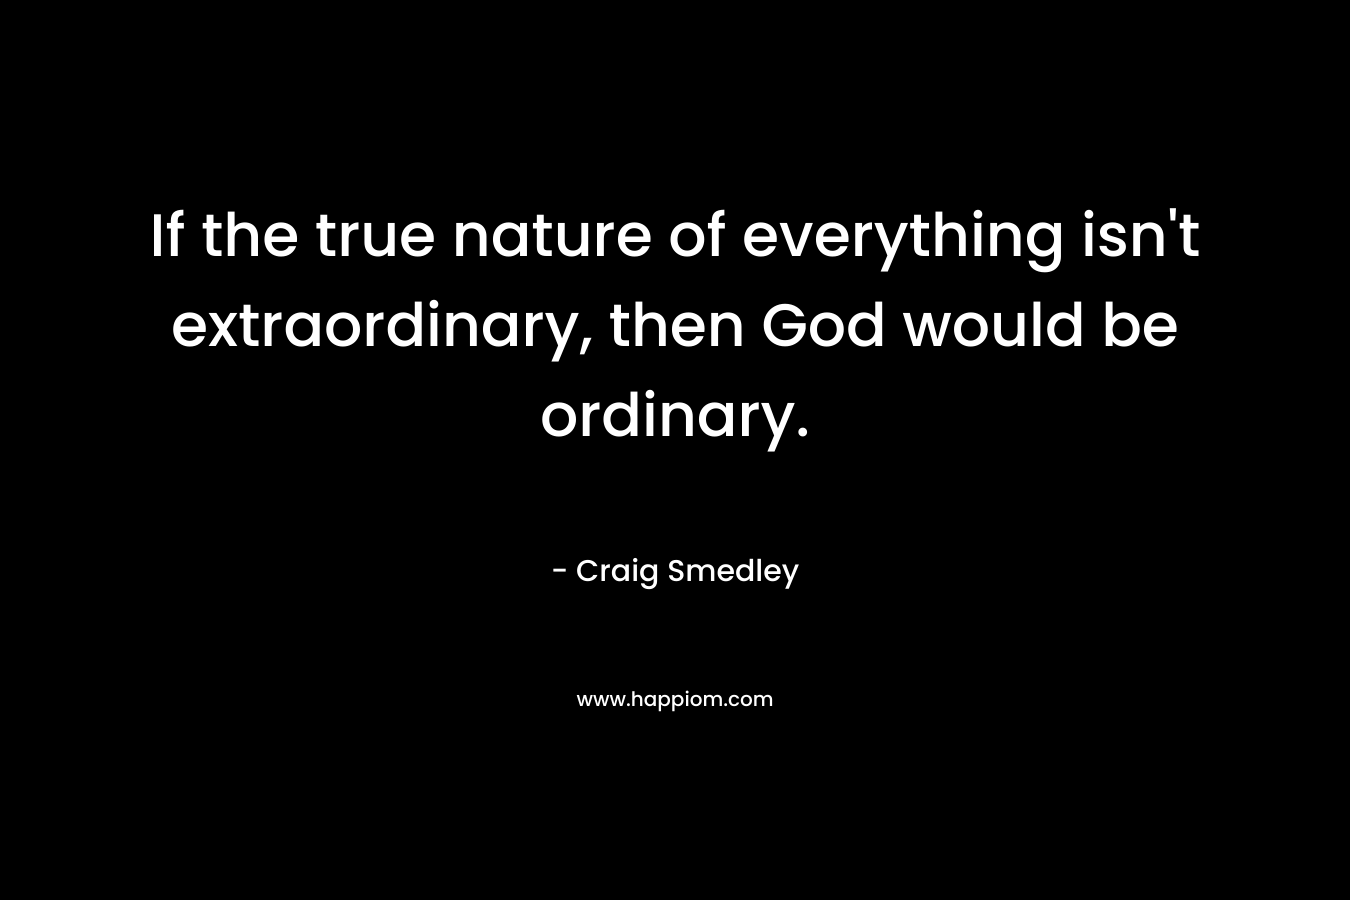 If the true nature of everything isn't extraordinary, then God would be ordinary.